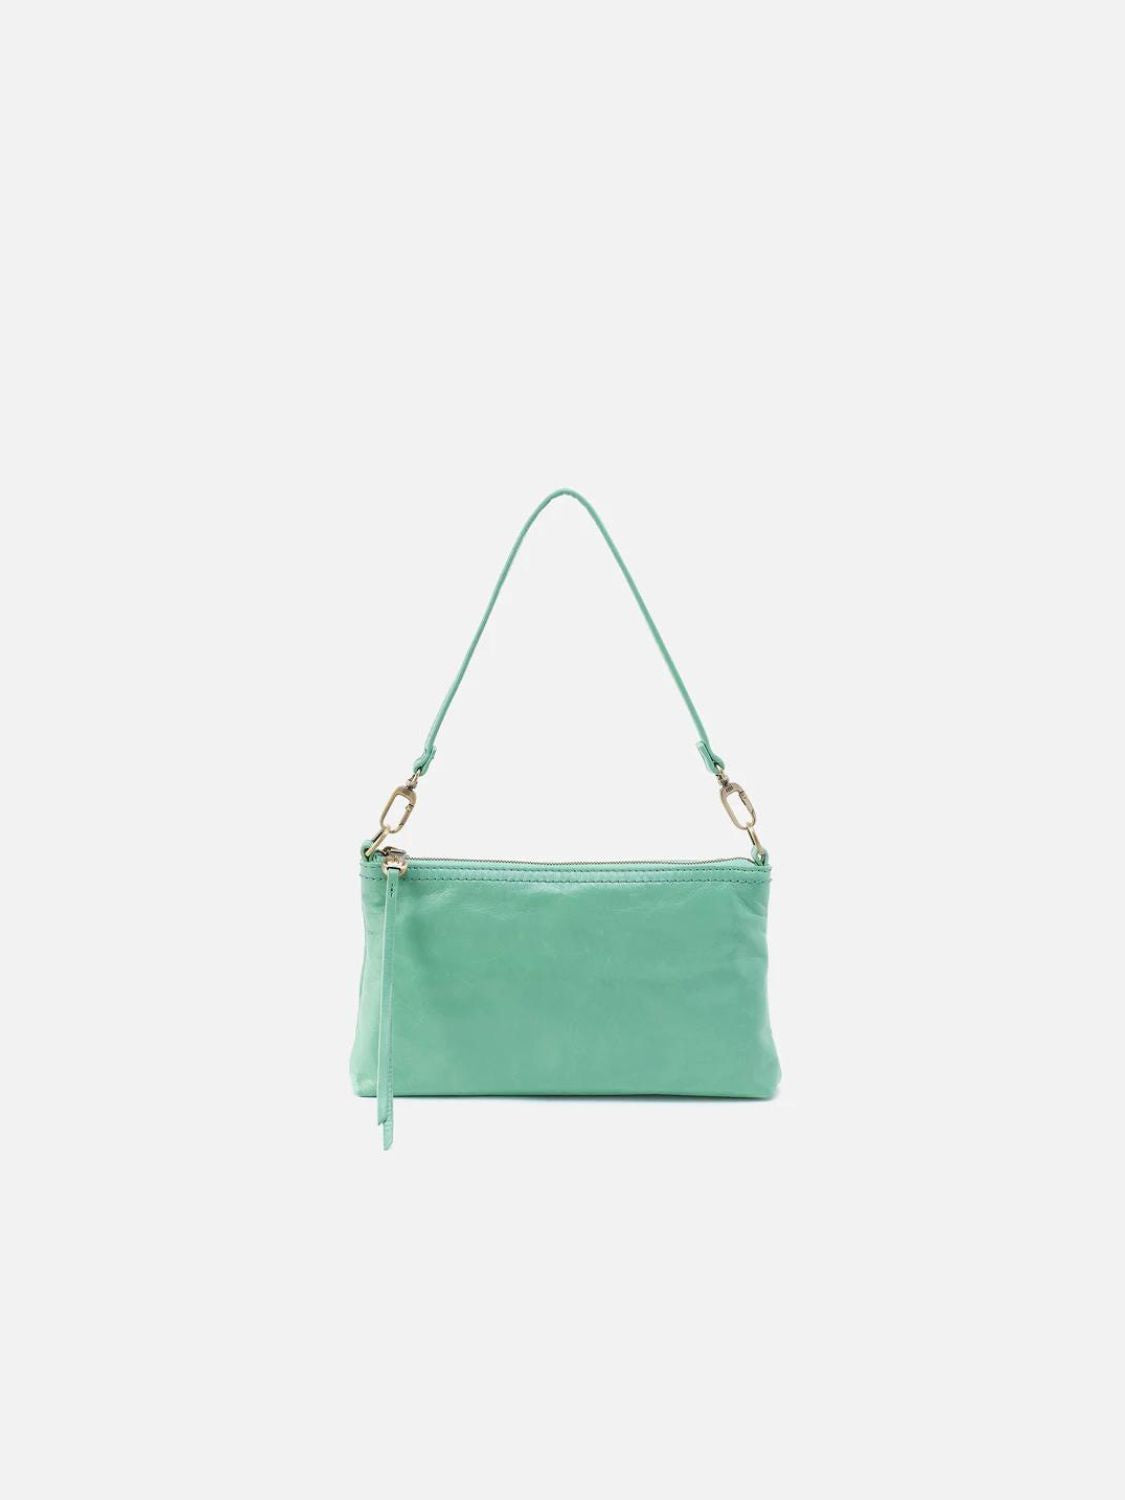 hobo darcy crossbody polished leather in seaglass-front view